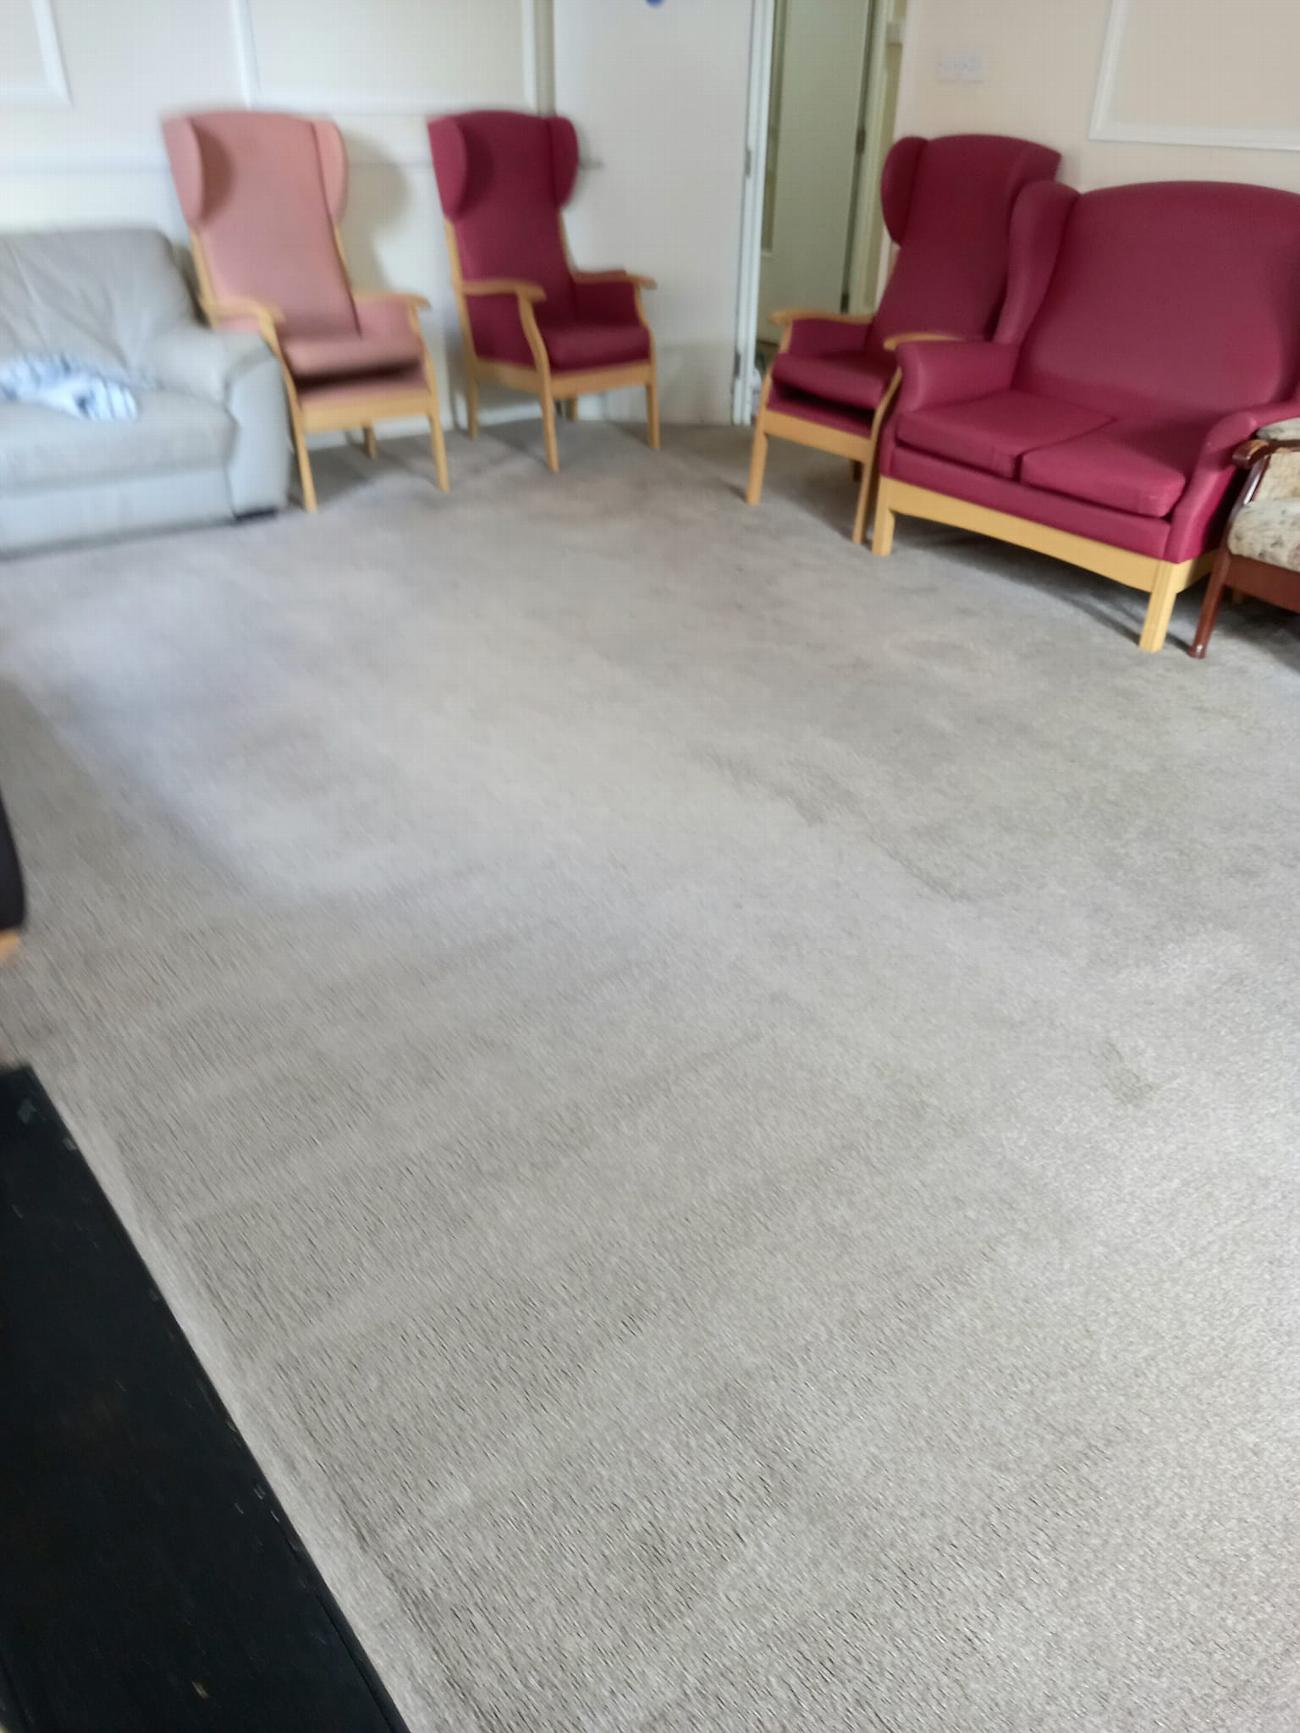 Carpet cleaning in Colchester | BCC - Best Carpet Cleaning gallery image 2